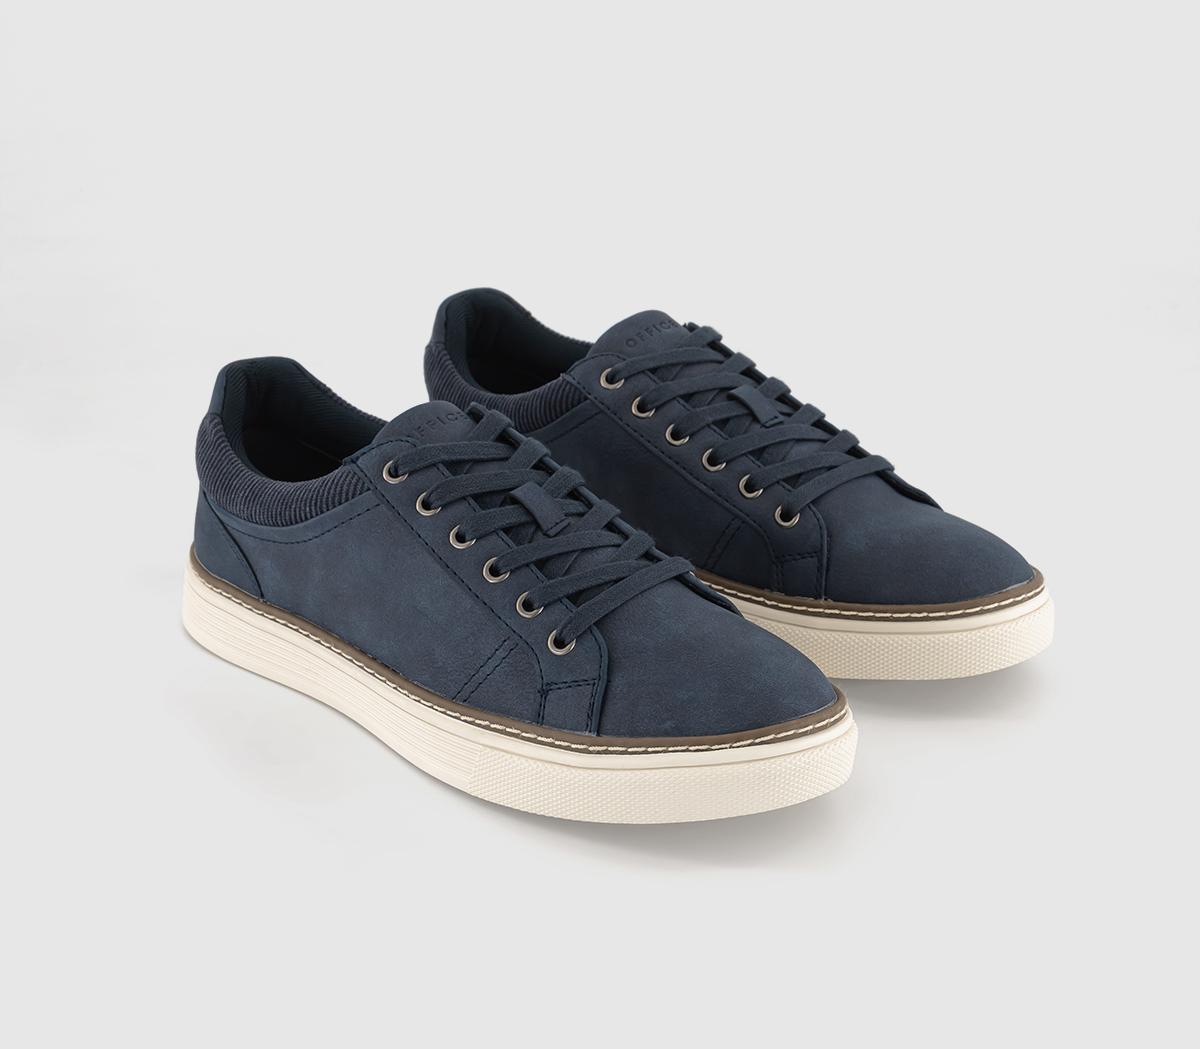 OFFICE Mens Chatsworth Cord Collar Trainers Navy Blue, 11